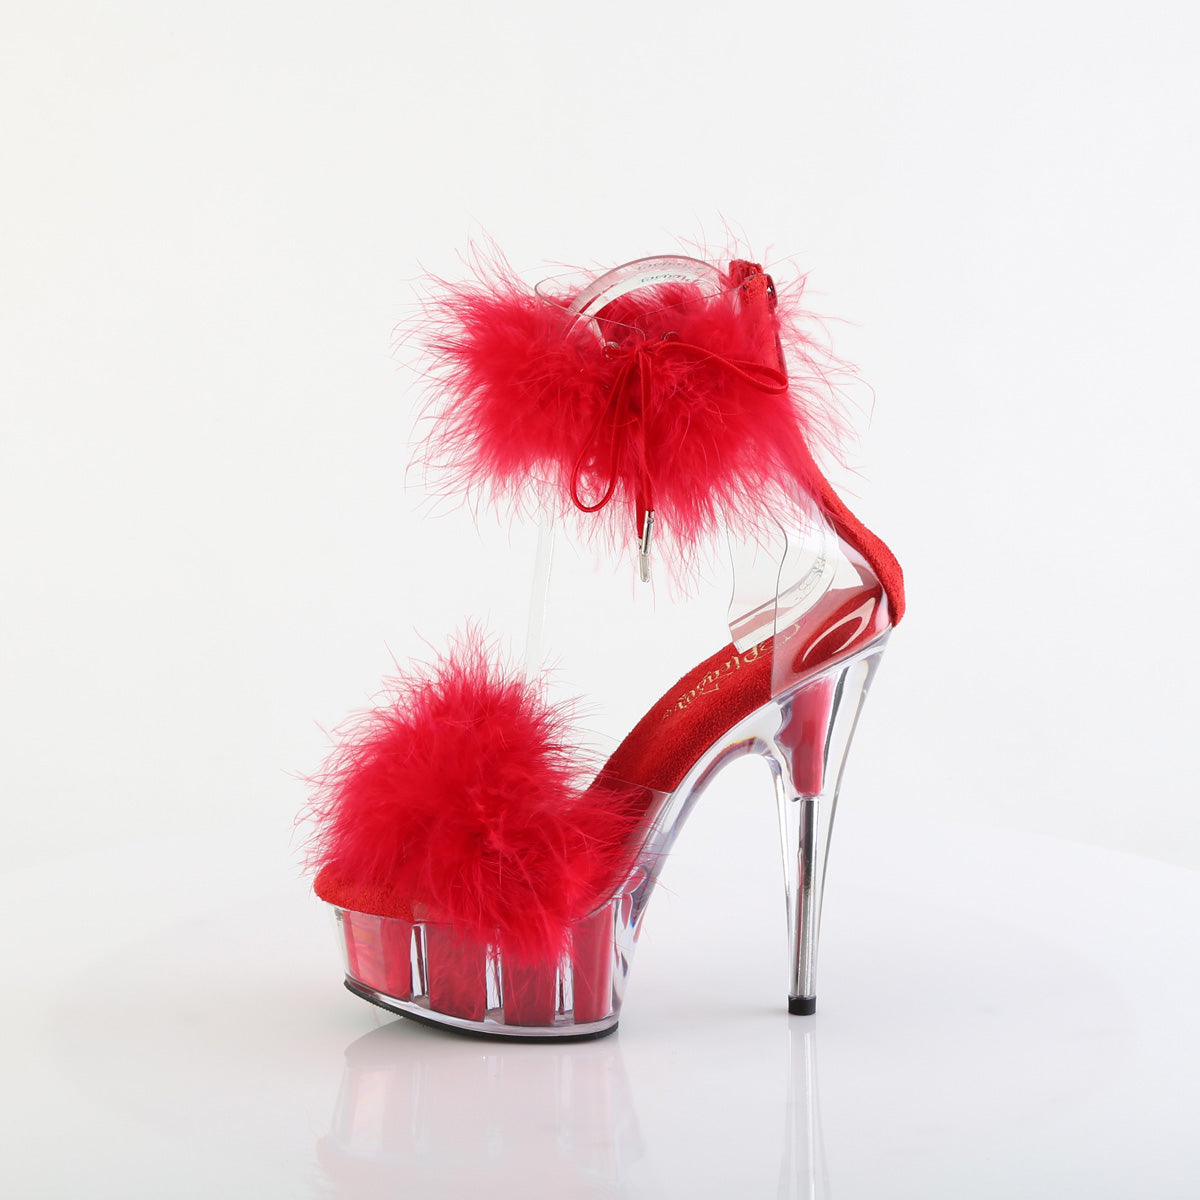 DELIGHT-624F Pleaser Pole Dancing Shoeswith Red Fluffy Trim Details.